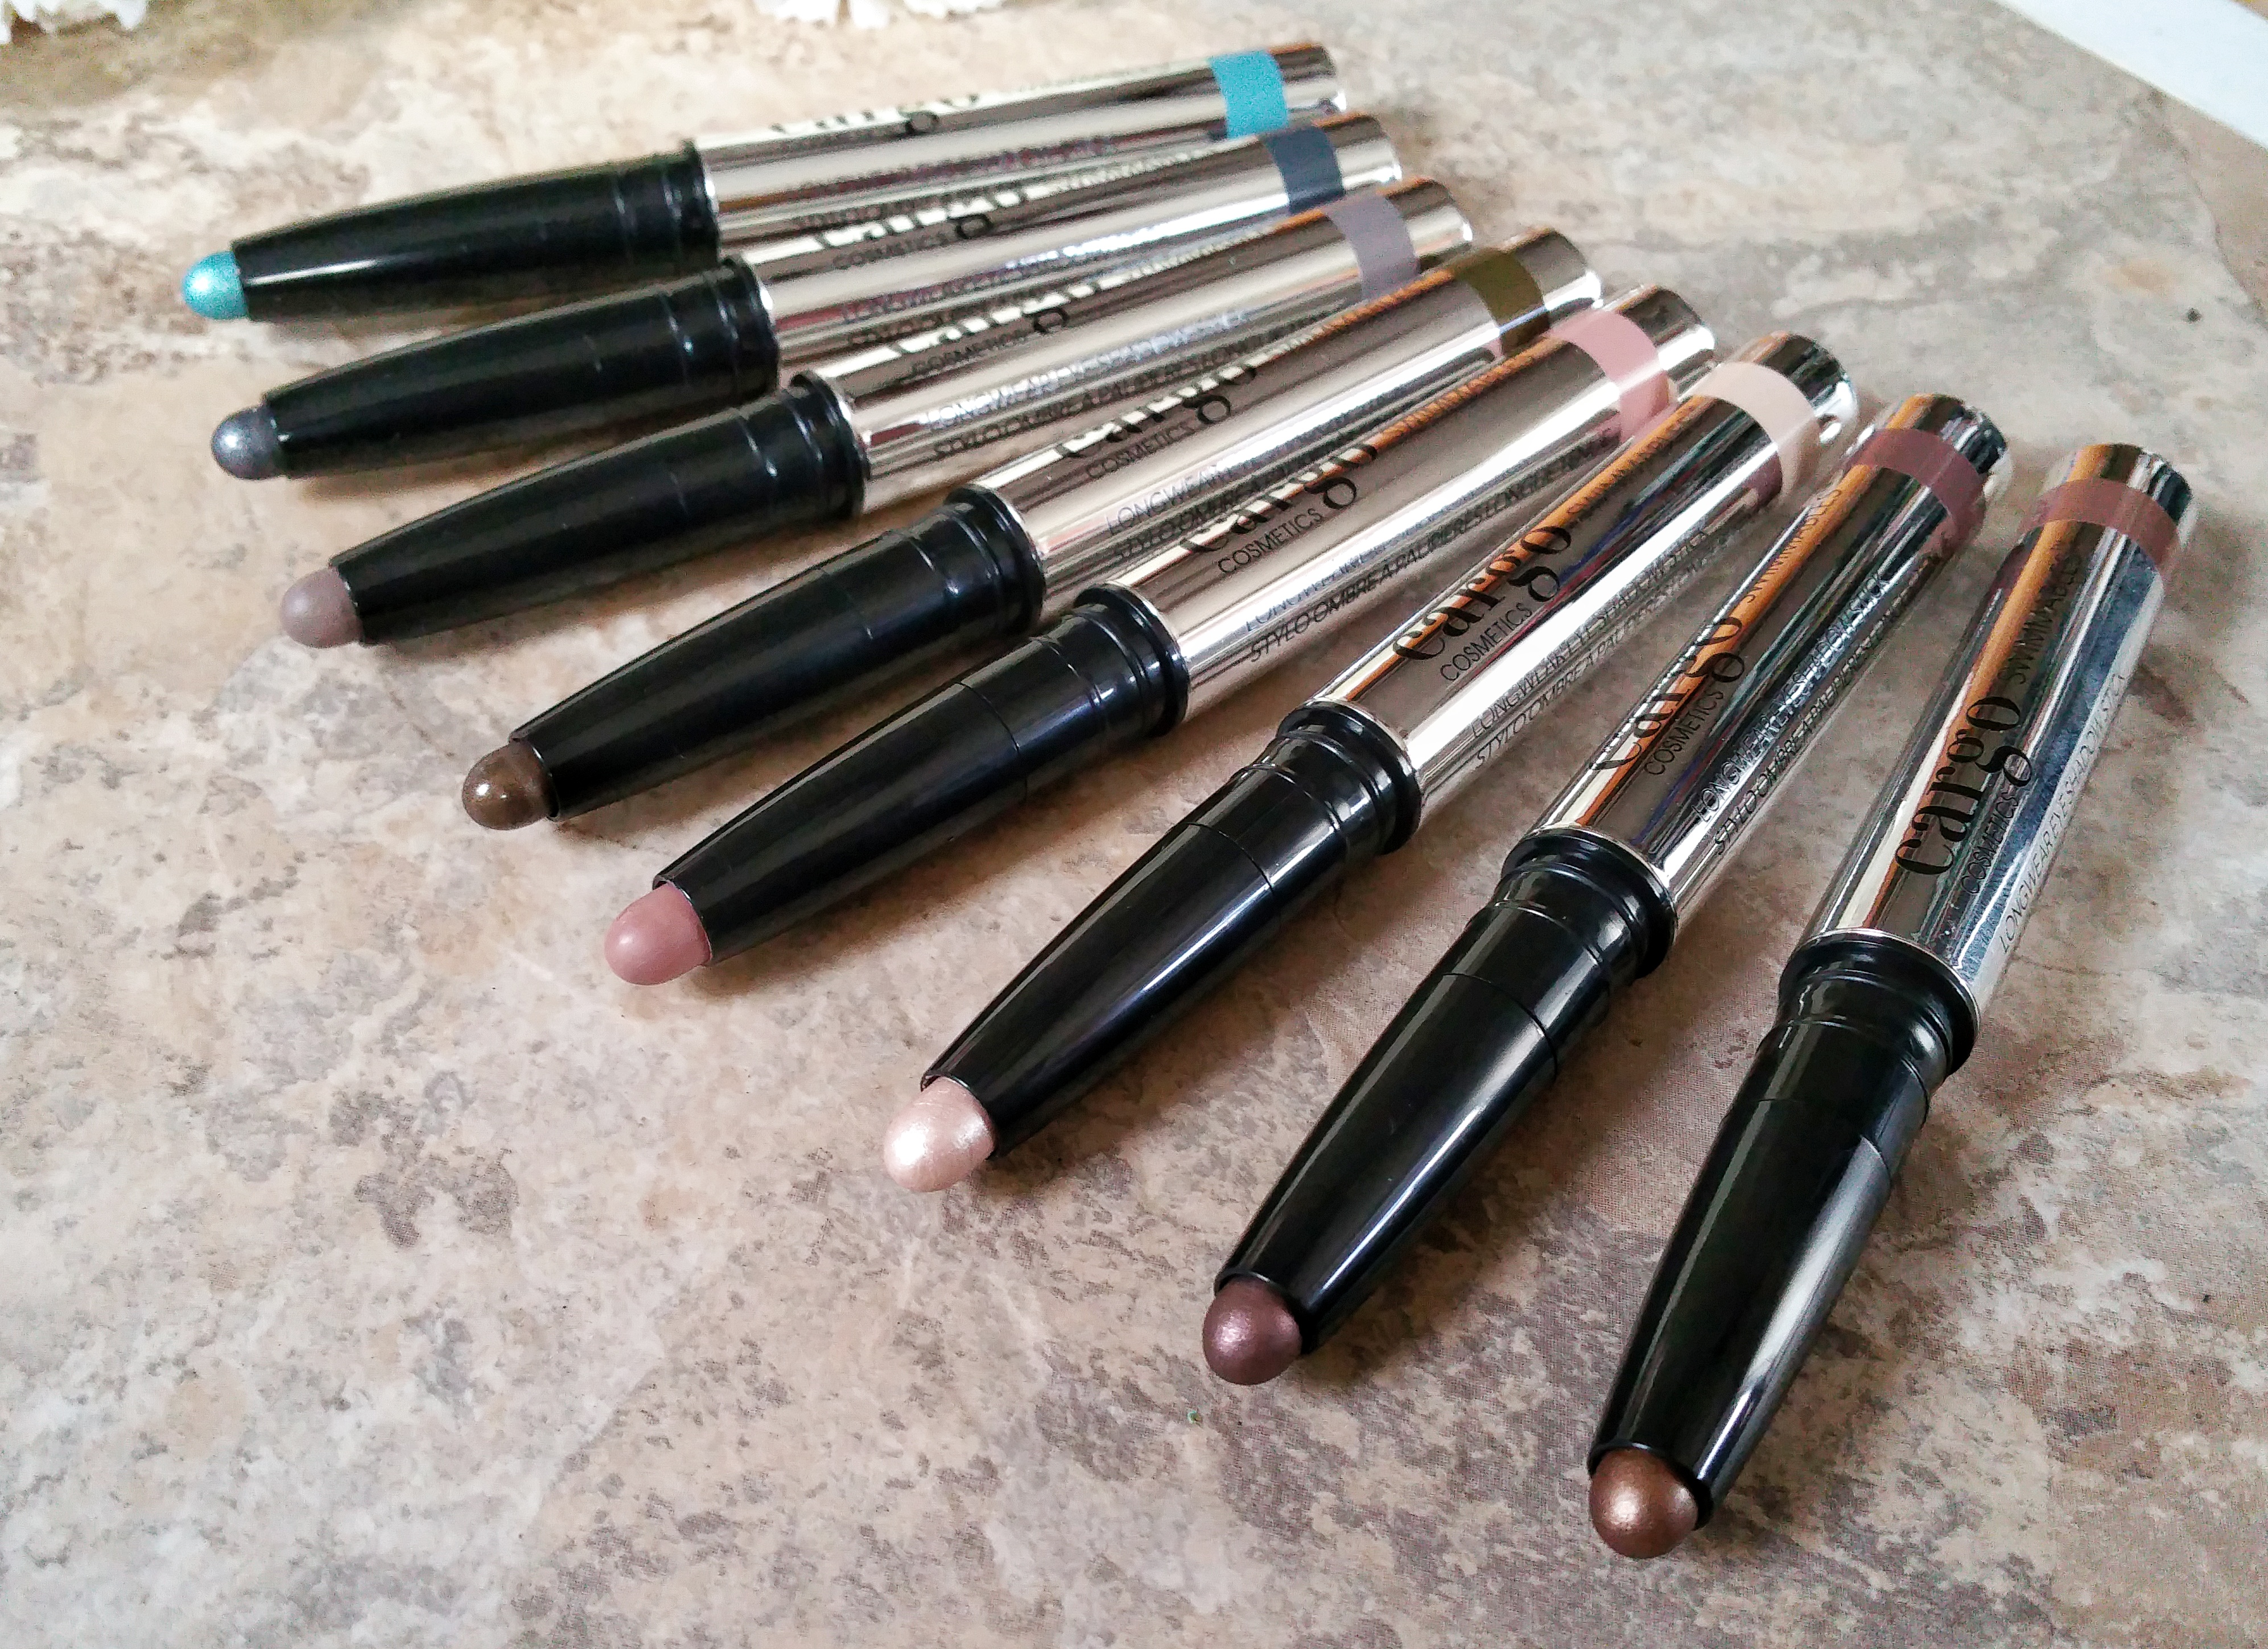 Cargo Cosmetics, cargo, swimmables, spring 2017 collection, summer 2017 collection, shadow stick, beauty, makeup, swatches, swimmables, longwear eye shadow stick, eye shadow stick, cream eye shadow, review,